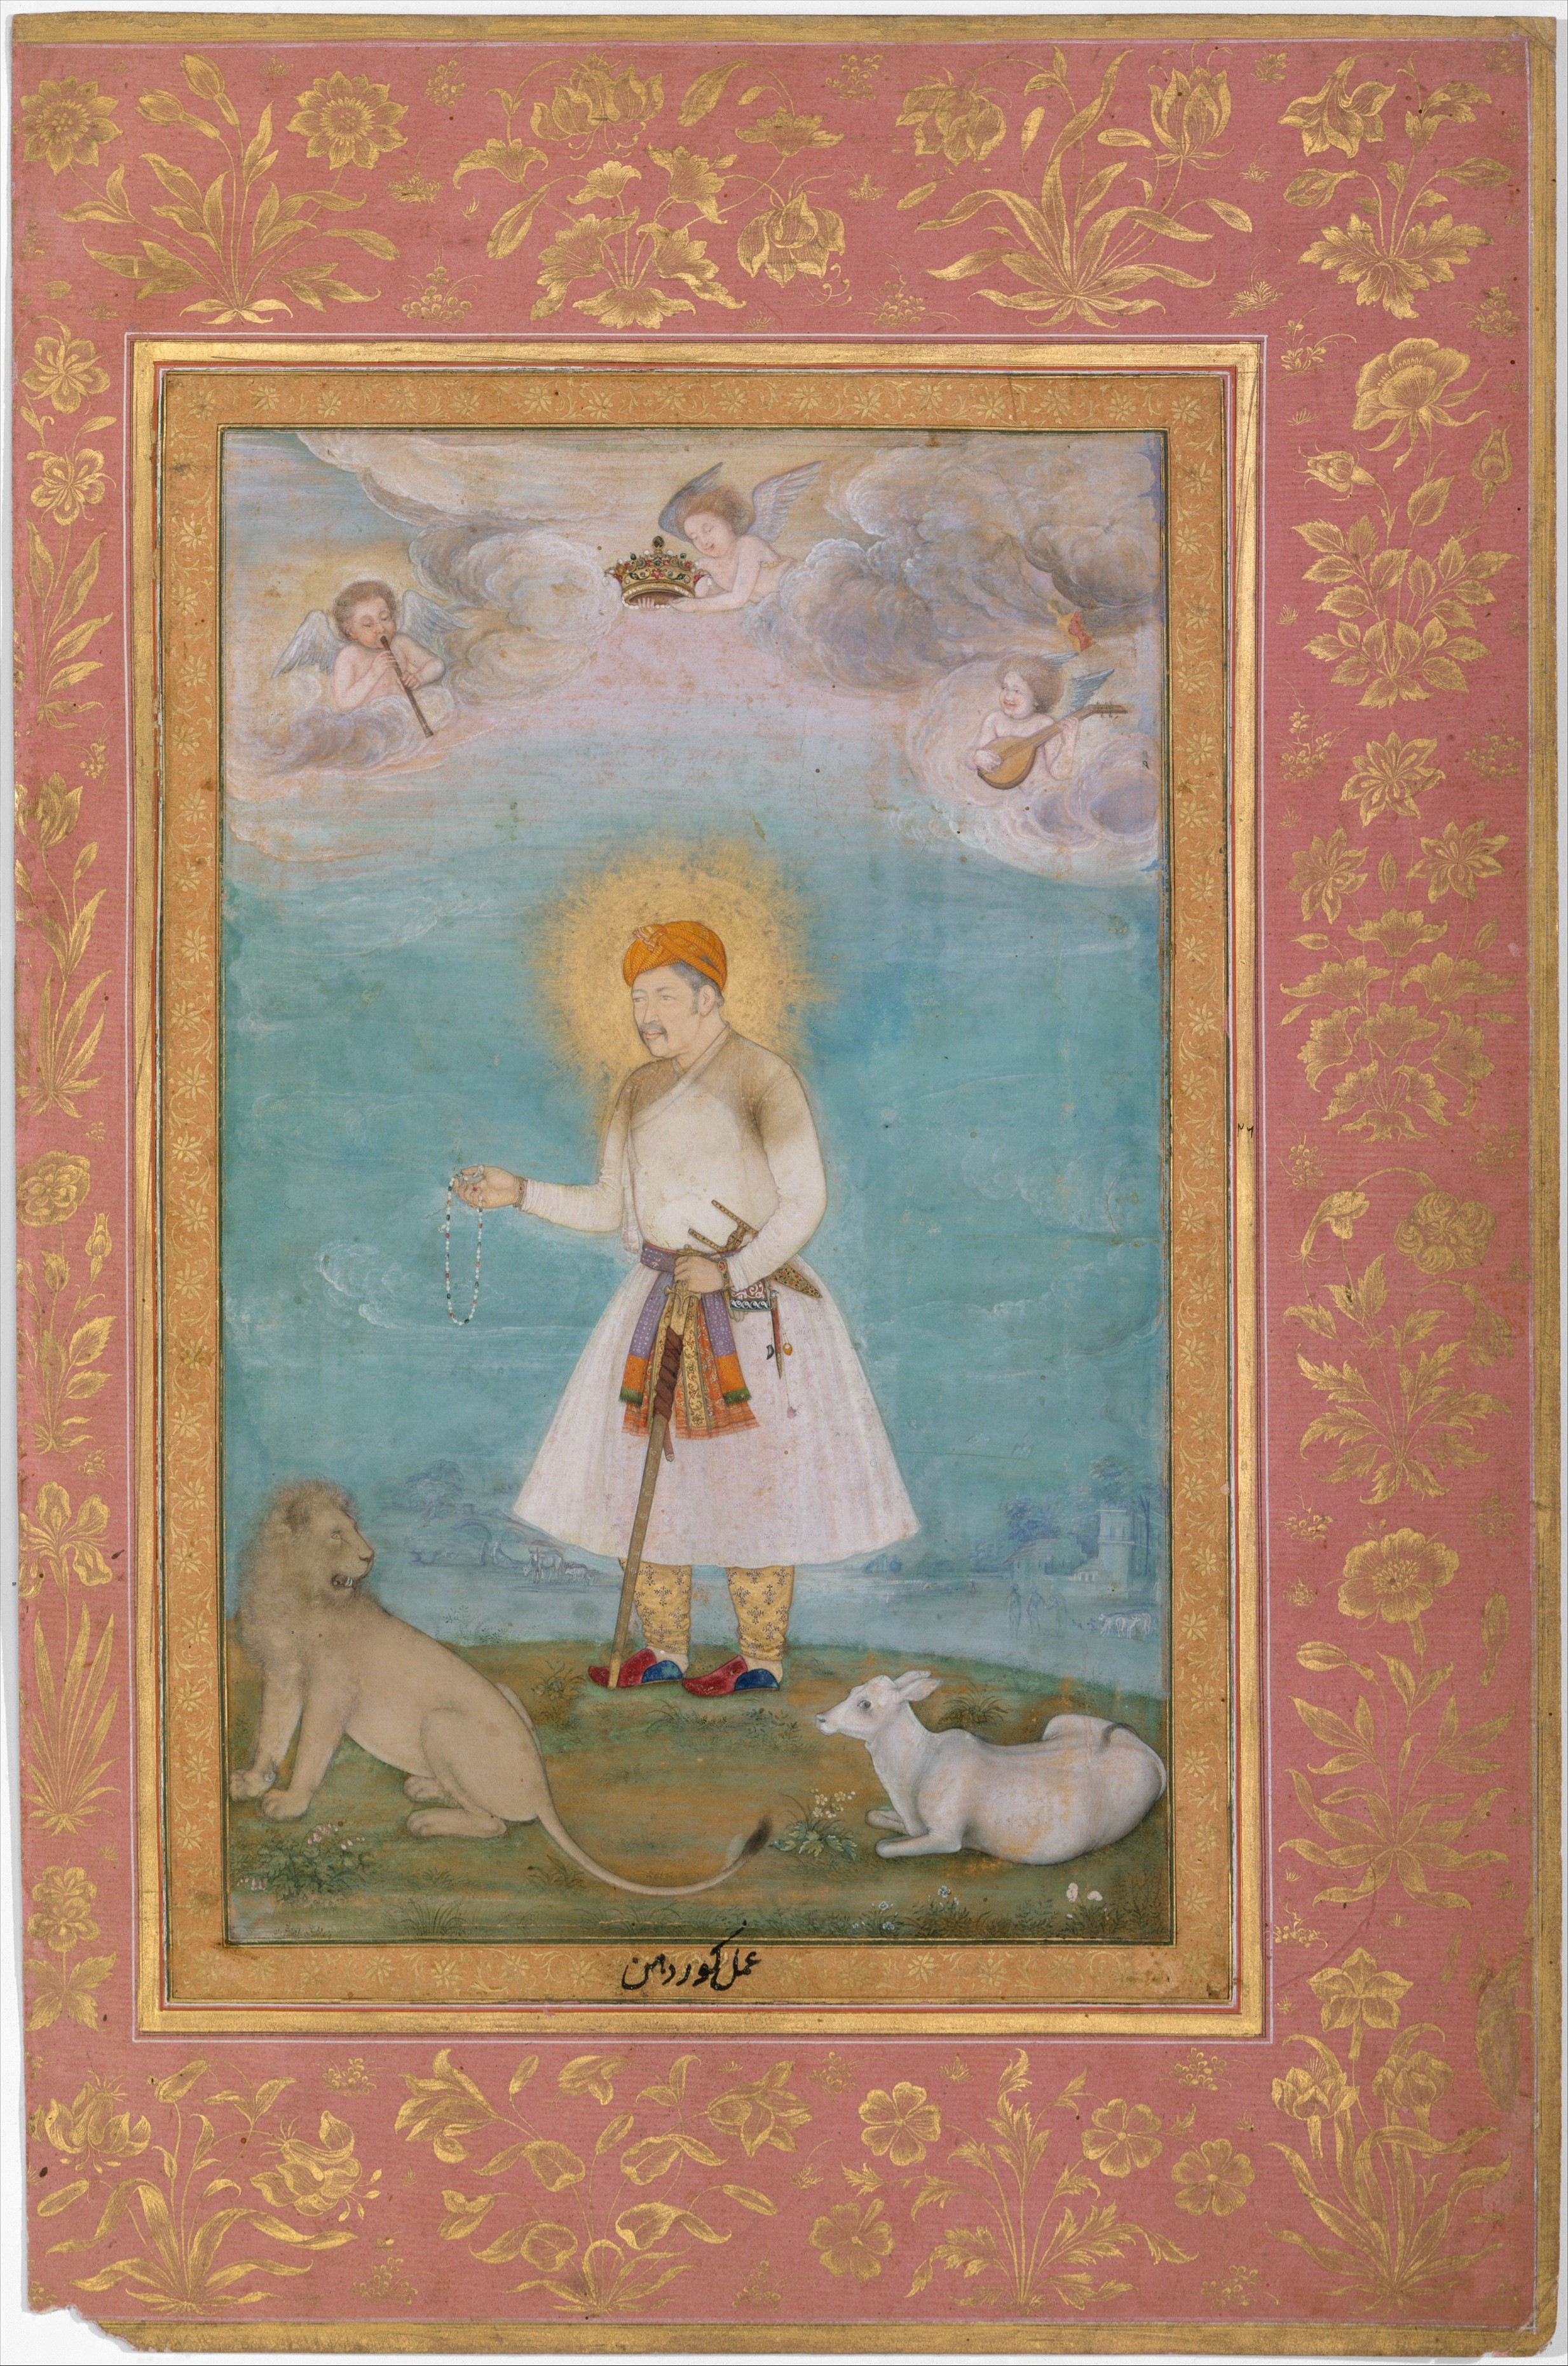 Akbar with Lion and Calf by  Govardhan - 1630 Metropolitan Museum of Art